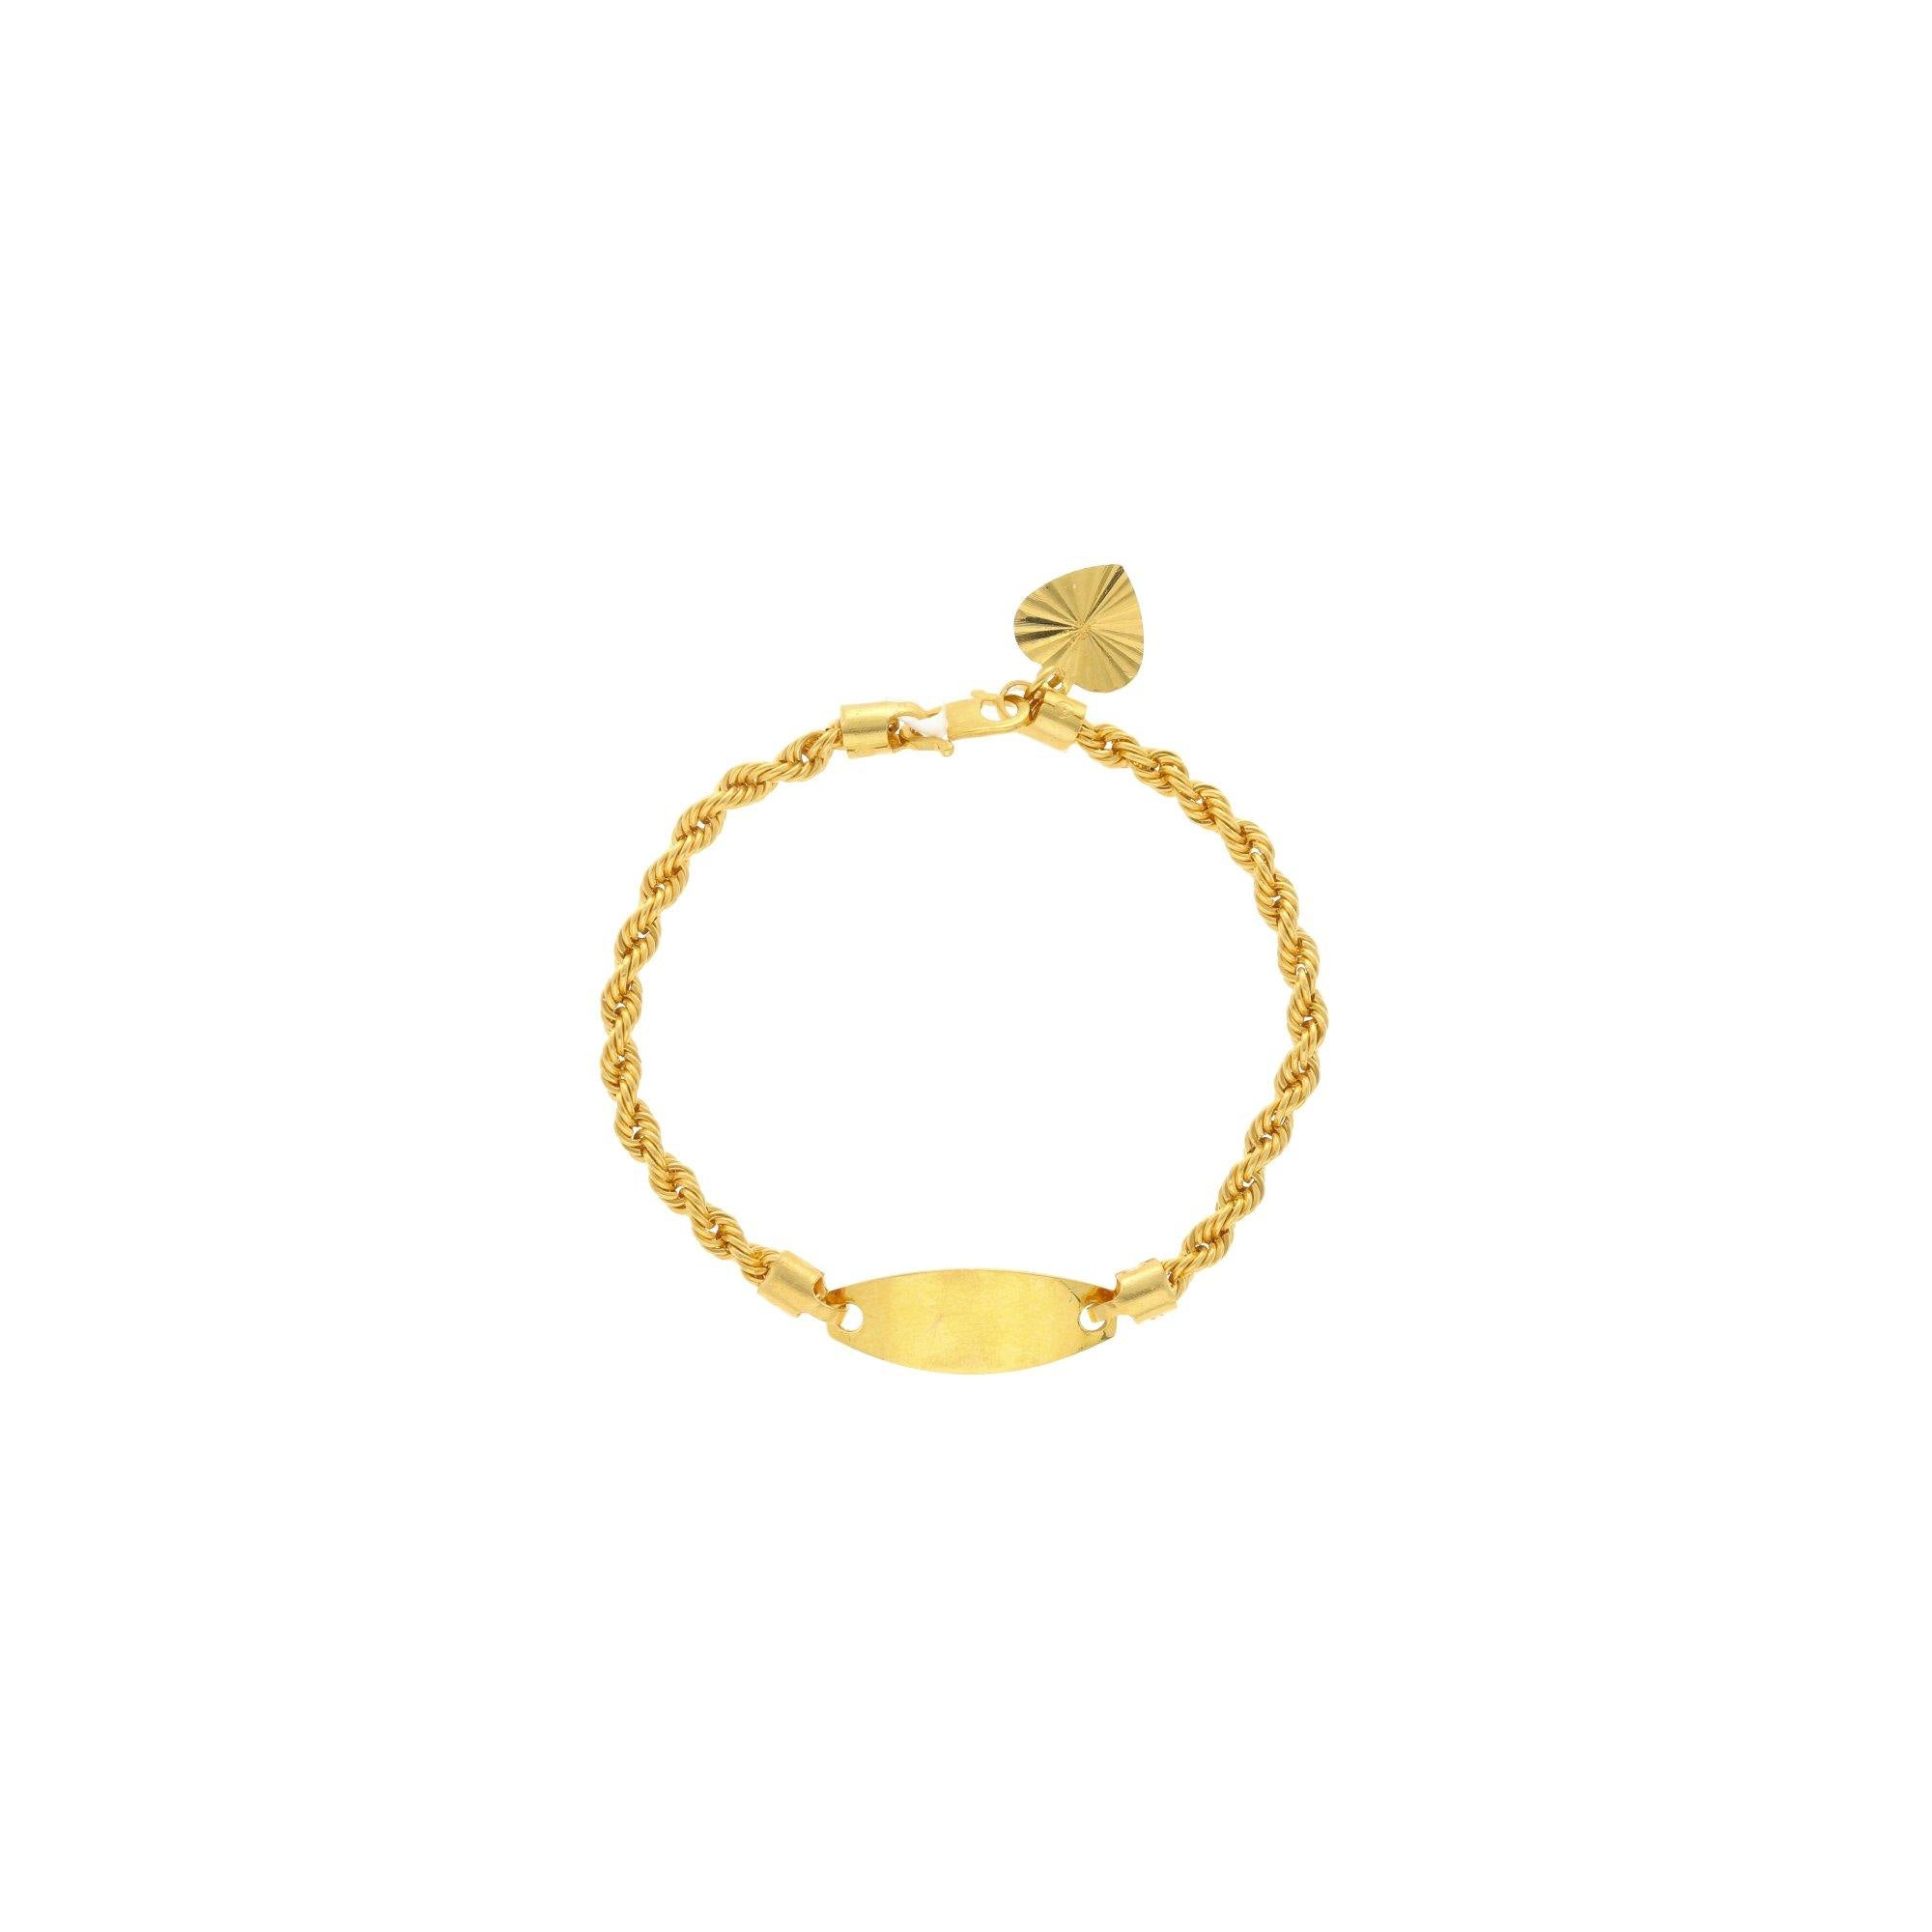 22K Gold Kids Bangle (2 Pcs) - BjBa23554 - 22K Gold bangles for kids (2  Pcs). Bangles are designed in hollow pipe style with fine machine cuts